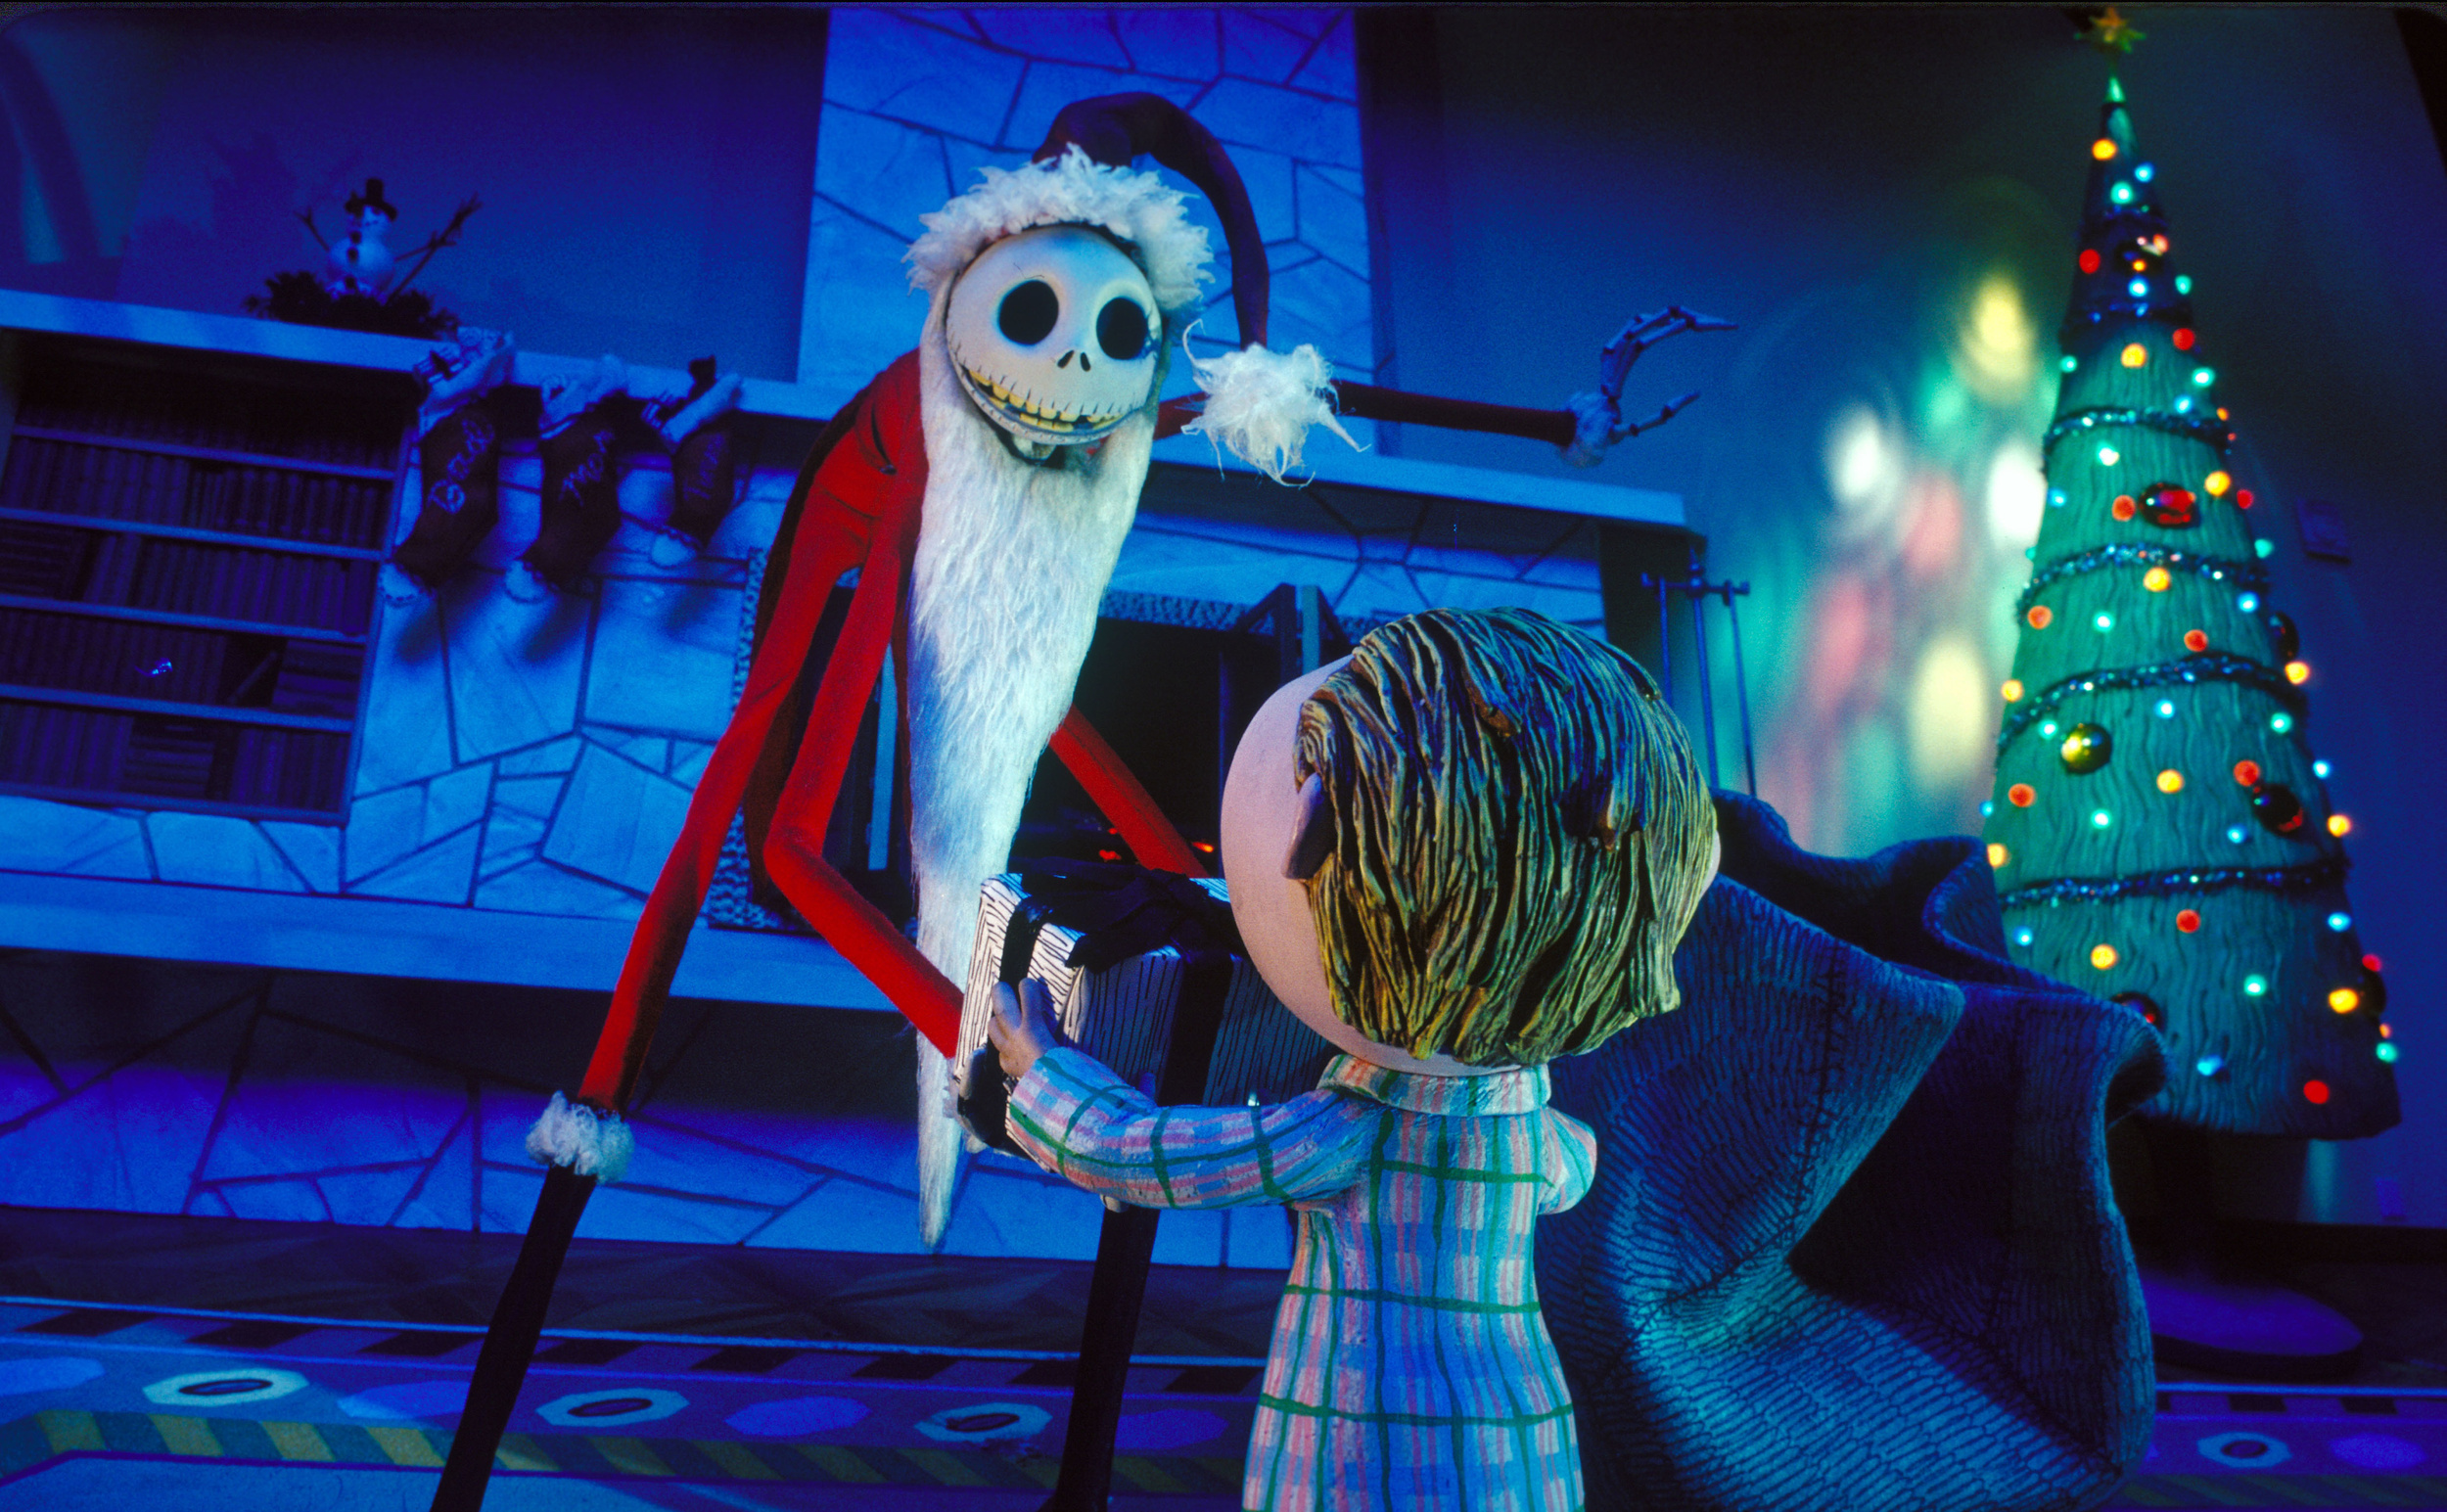 <p>As the first major stop-motion animated film to be released, <em>The Nightmare Before Christmas</em> permanently changed the creative landscape thanks to its unprecedented visuals. The film, perfect for both Halloween and Christmas viewing, follows Jack Skellington as he discovers Christmas. Many people are under the impression that it is directed by Tim Burton, but it is actually directed by <em>Coraline</em>’s Henry Selick. Burton produced the movie and wrote the story. </p><p><a href='https://www.msn.com/en-us/community/channel/vid-cj9pqbr0vn9in2b6ddcd8sfgpfq6x6utp44fssrv6mc2gtybw0us'>Follow us on MSN to see more of our exclusive entertainment content.</a></p>